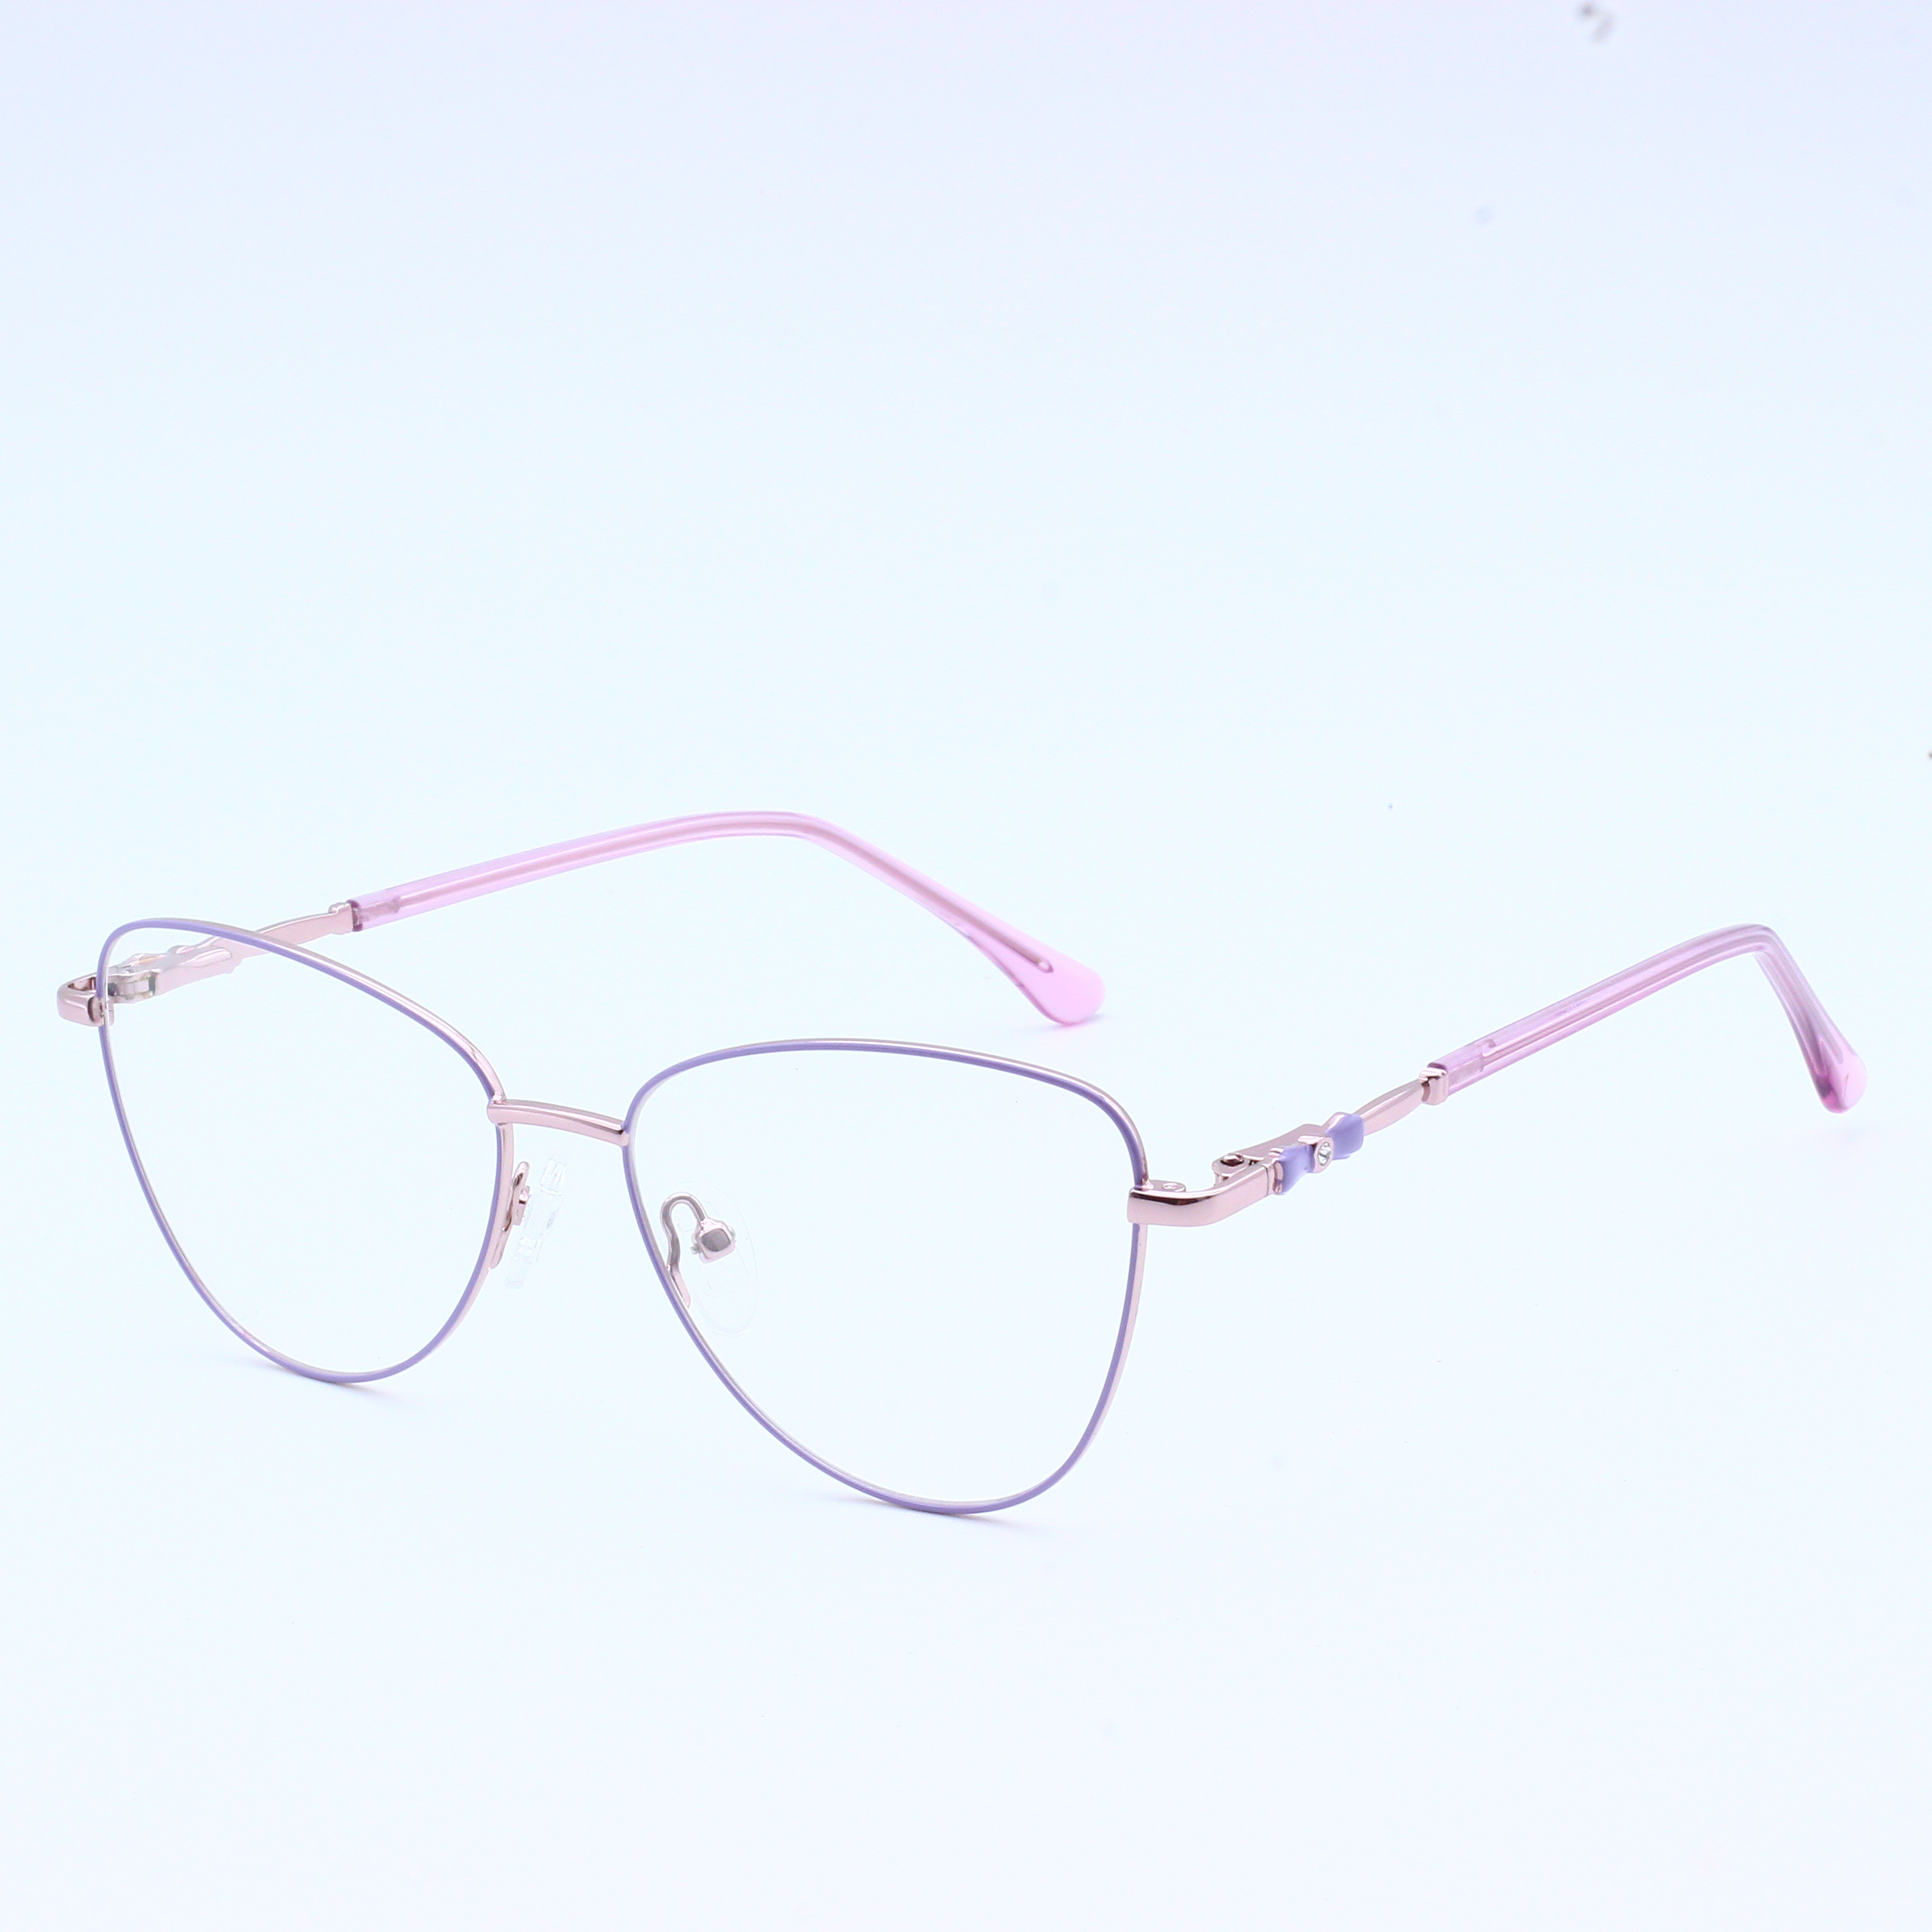 Eyeglasses Business Optical spectacle Frames In Stock (10)